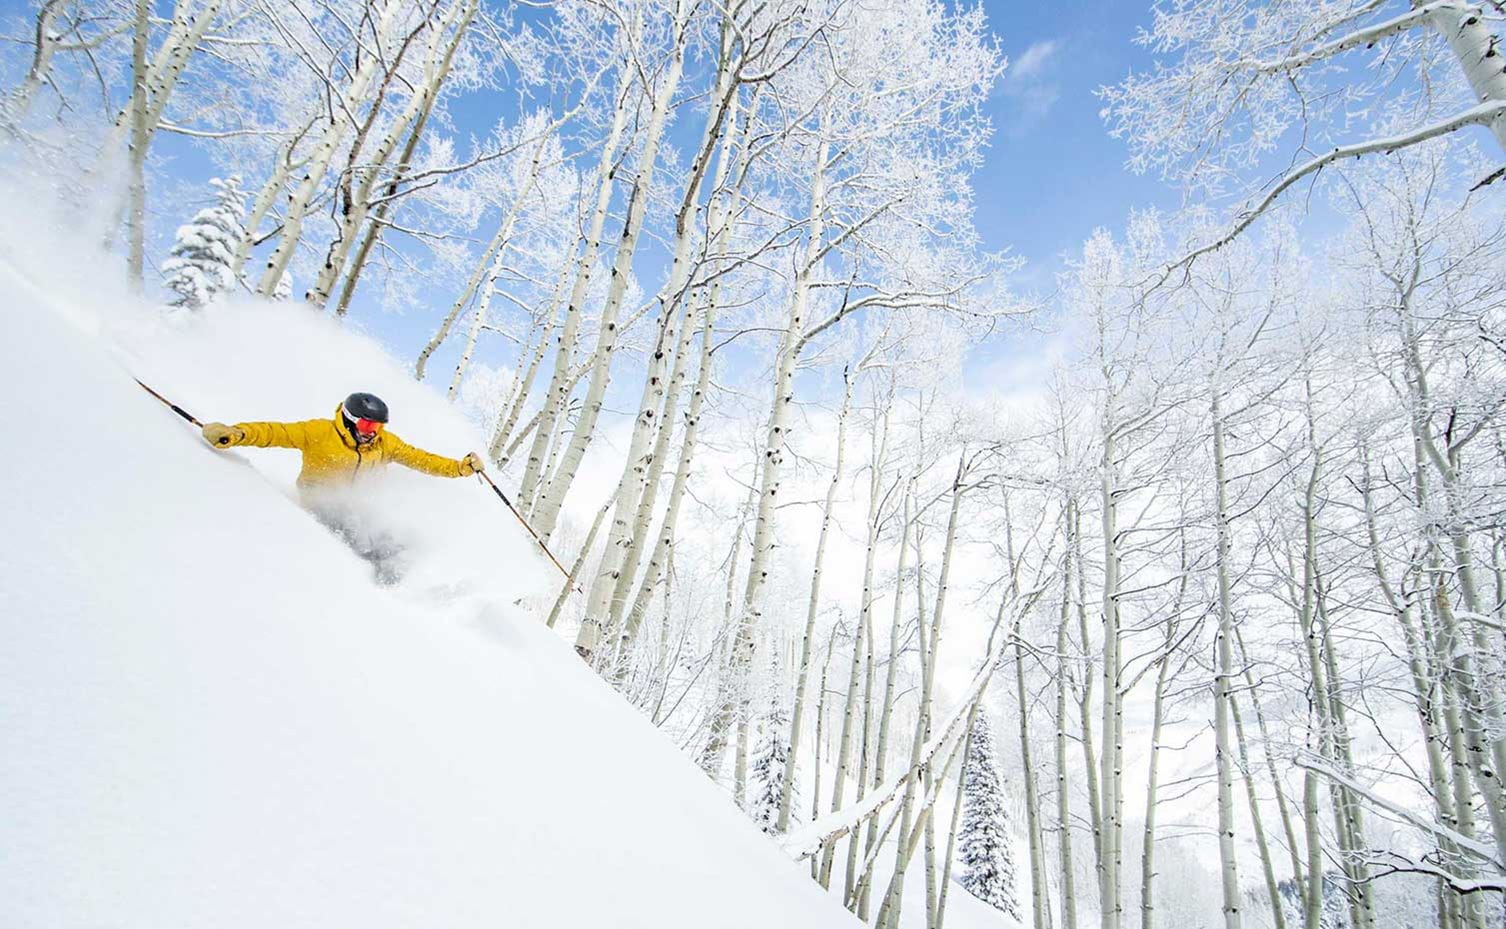 Life in Aspen Snowmass includes skiing